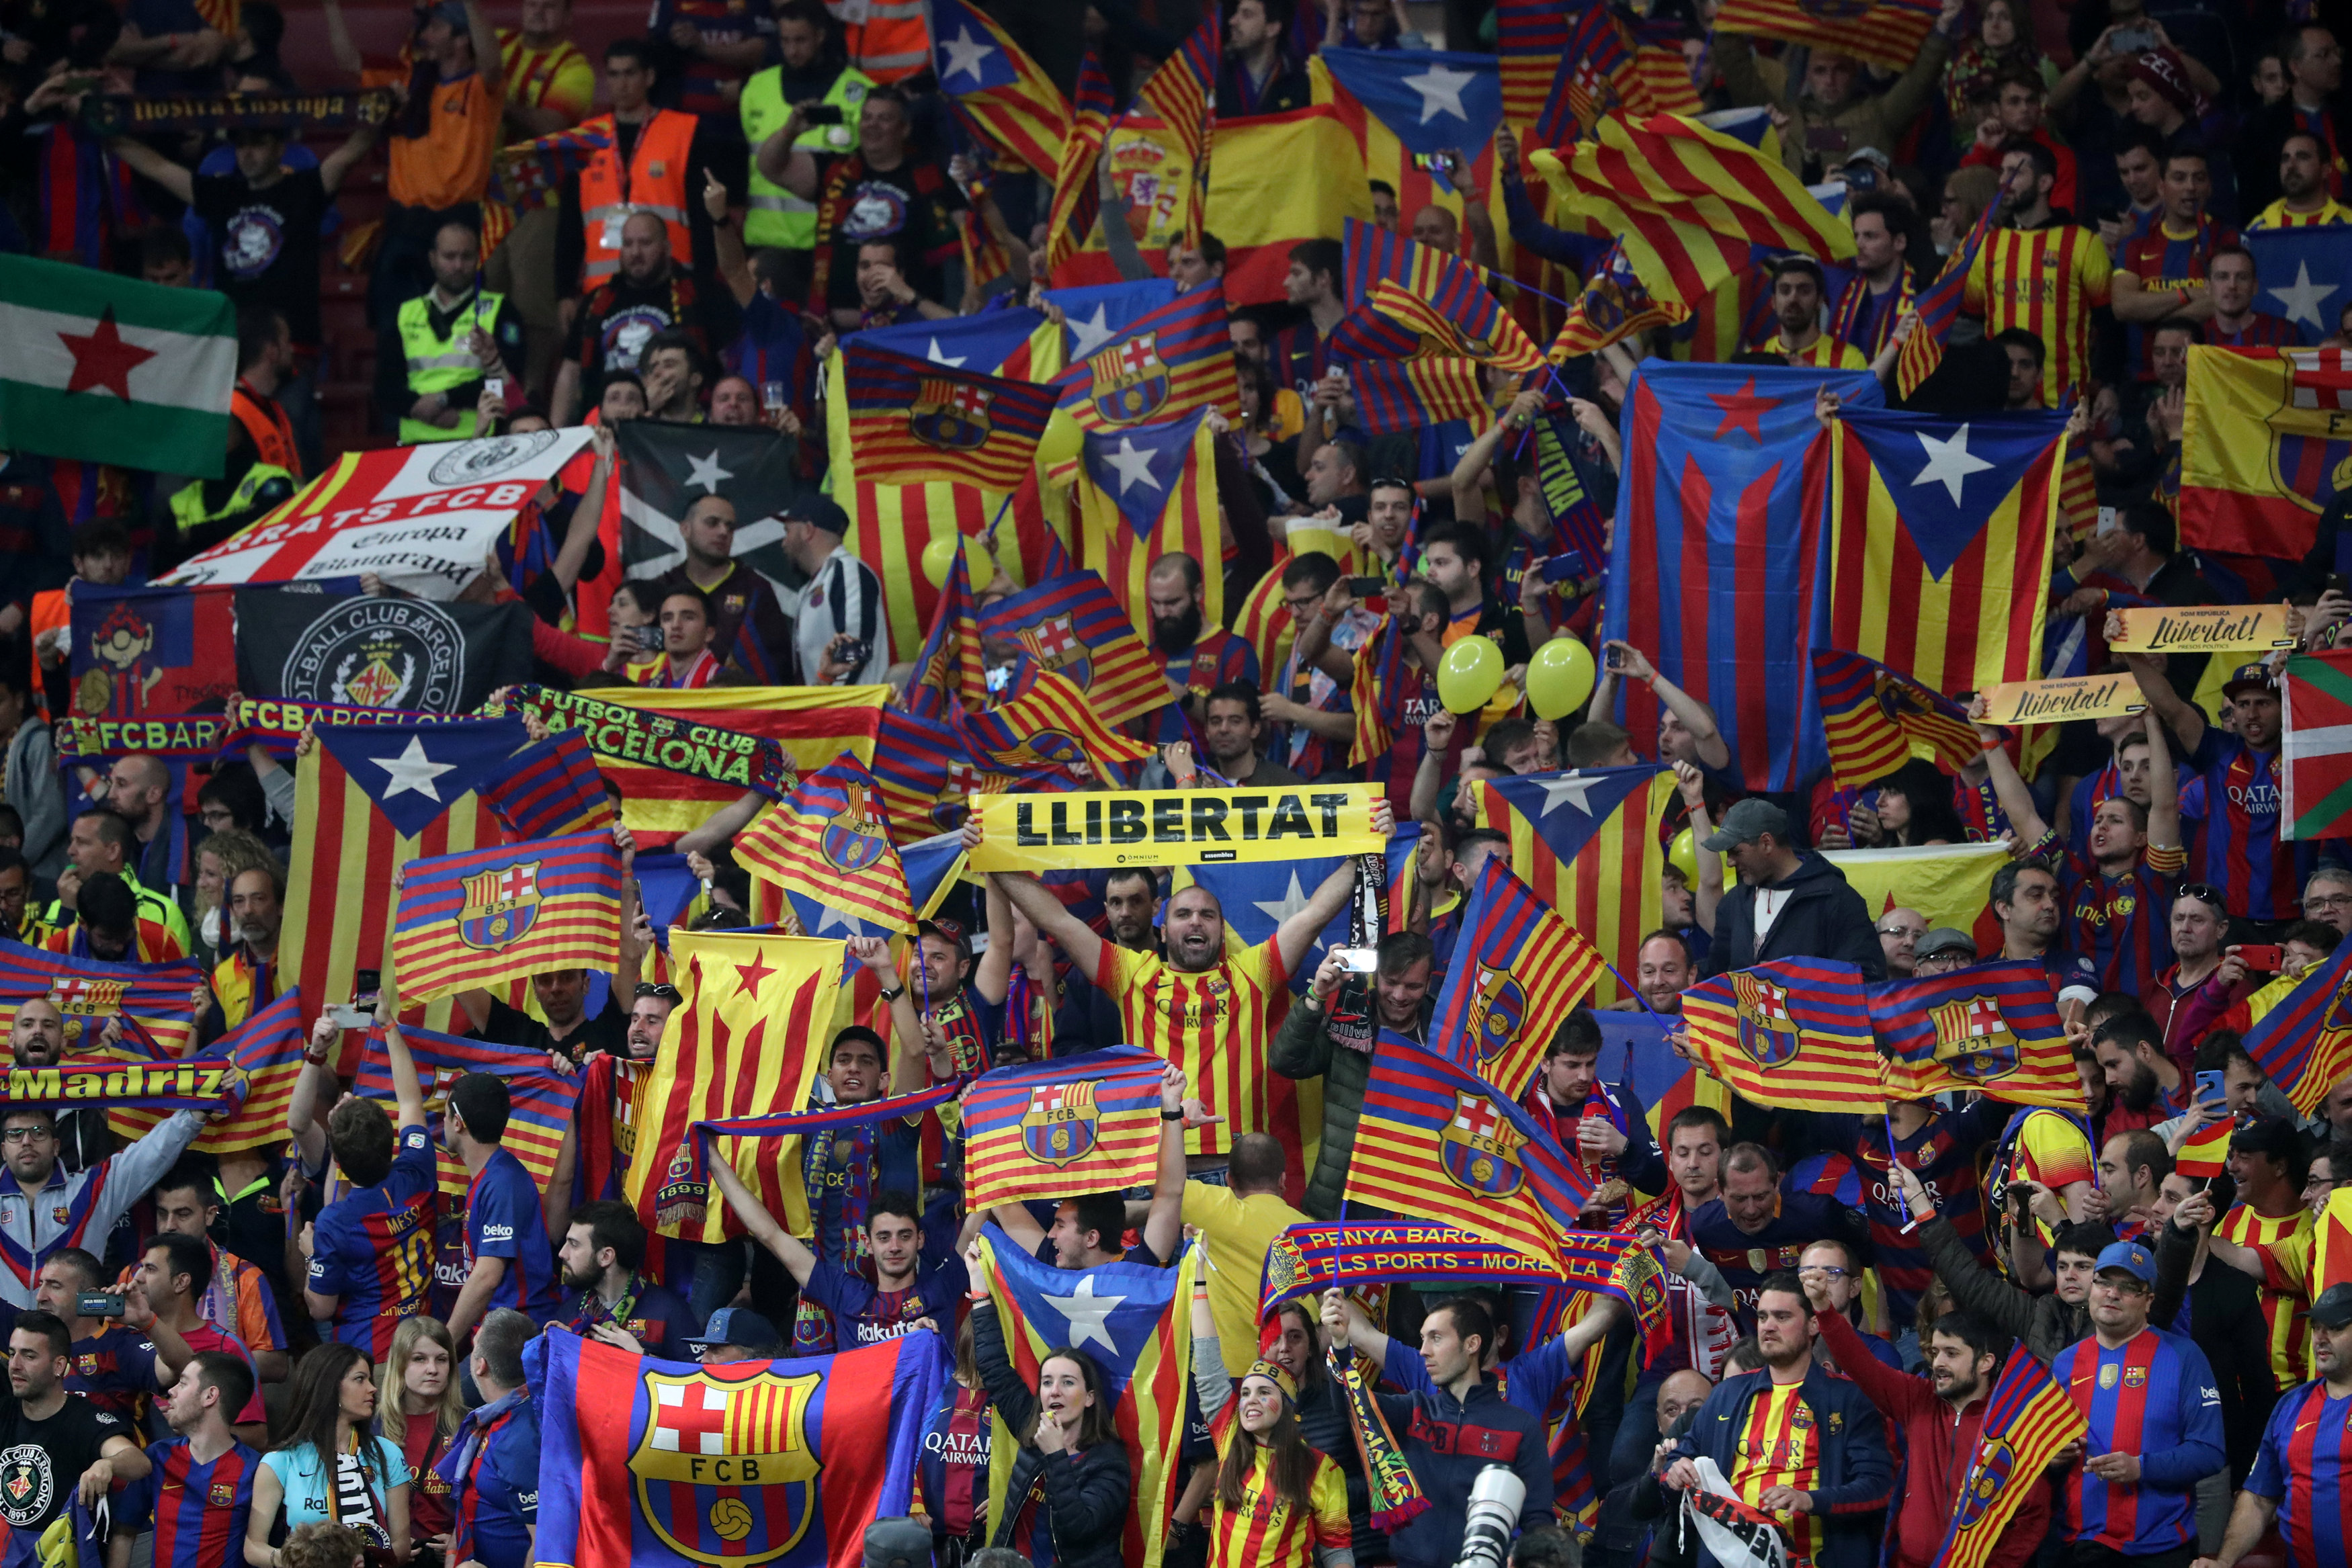 Barcelona fan holds up a “Llibertat” (freedom) banner before the match as Catalan and Catalan independence flags are displayed (courtesy of REUTERS/Susana Vera) 